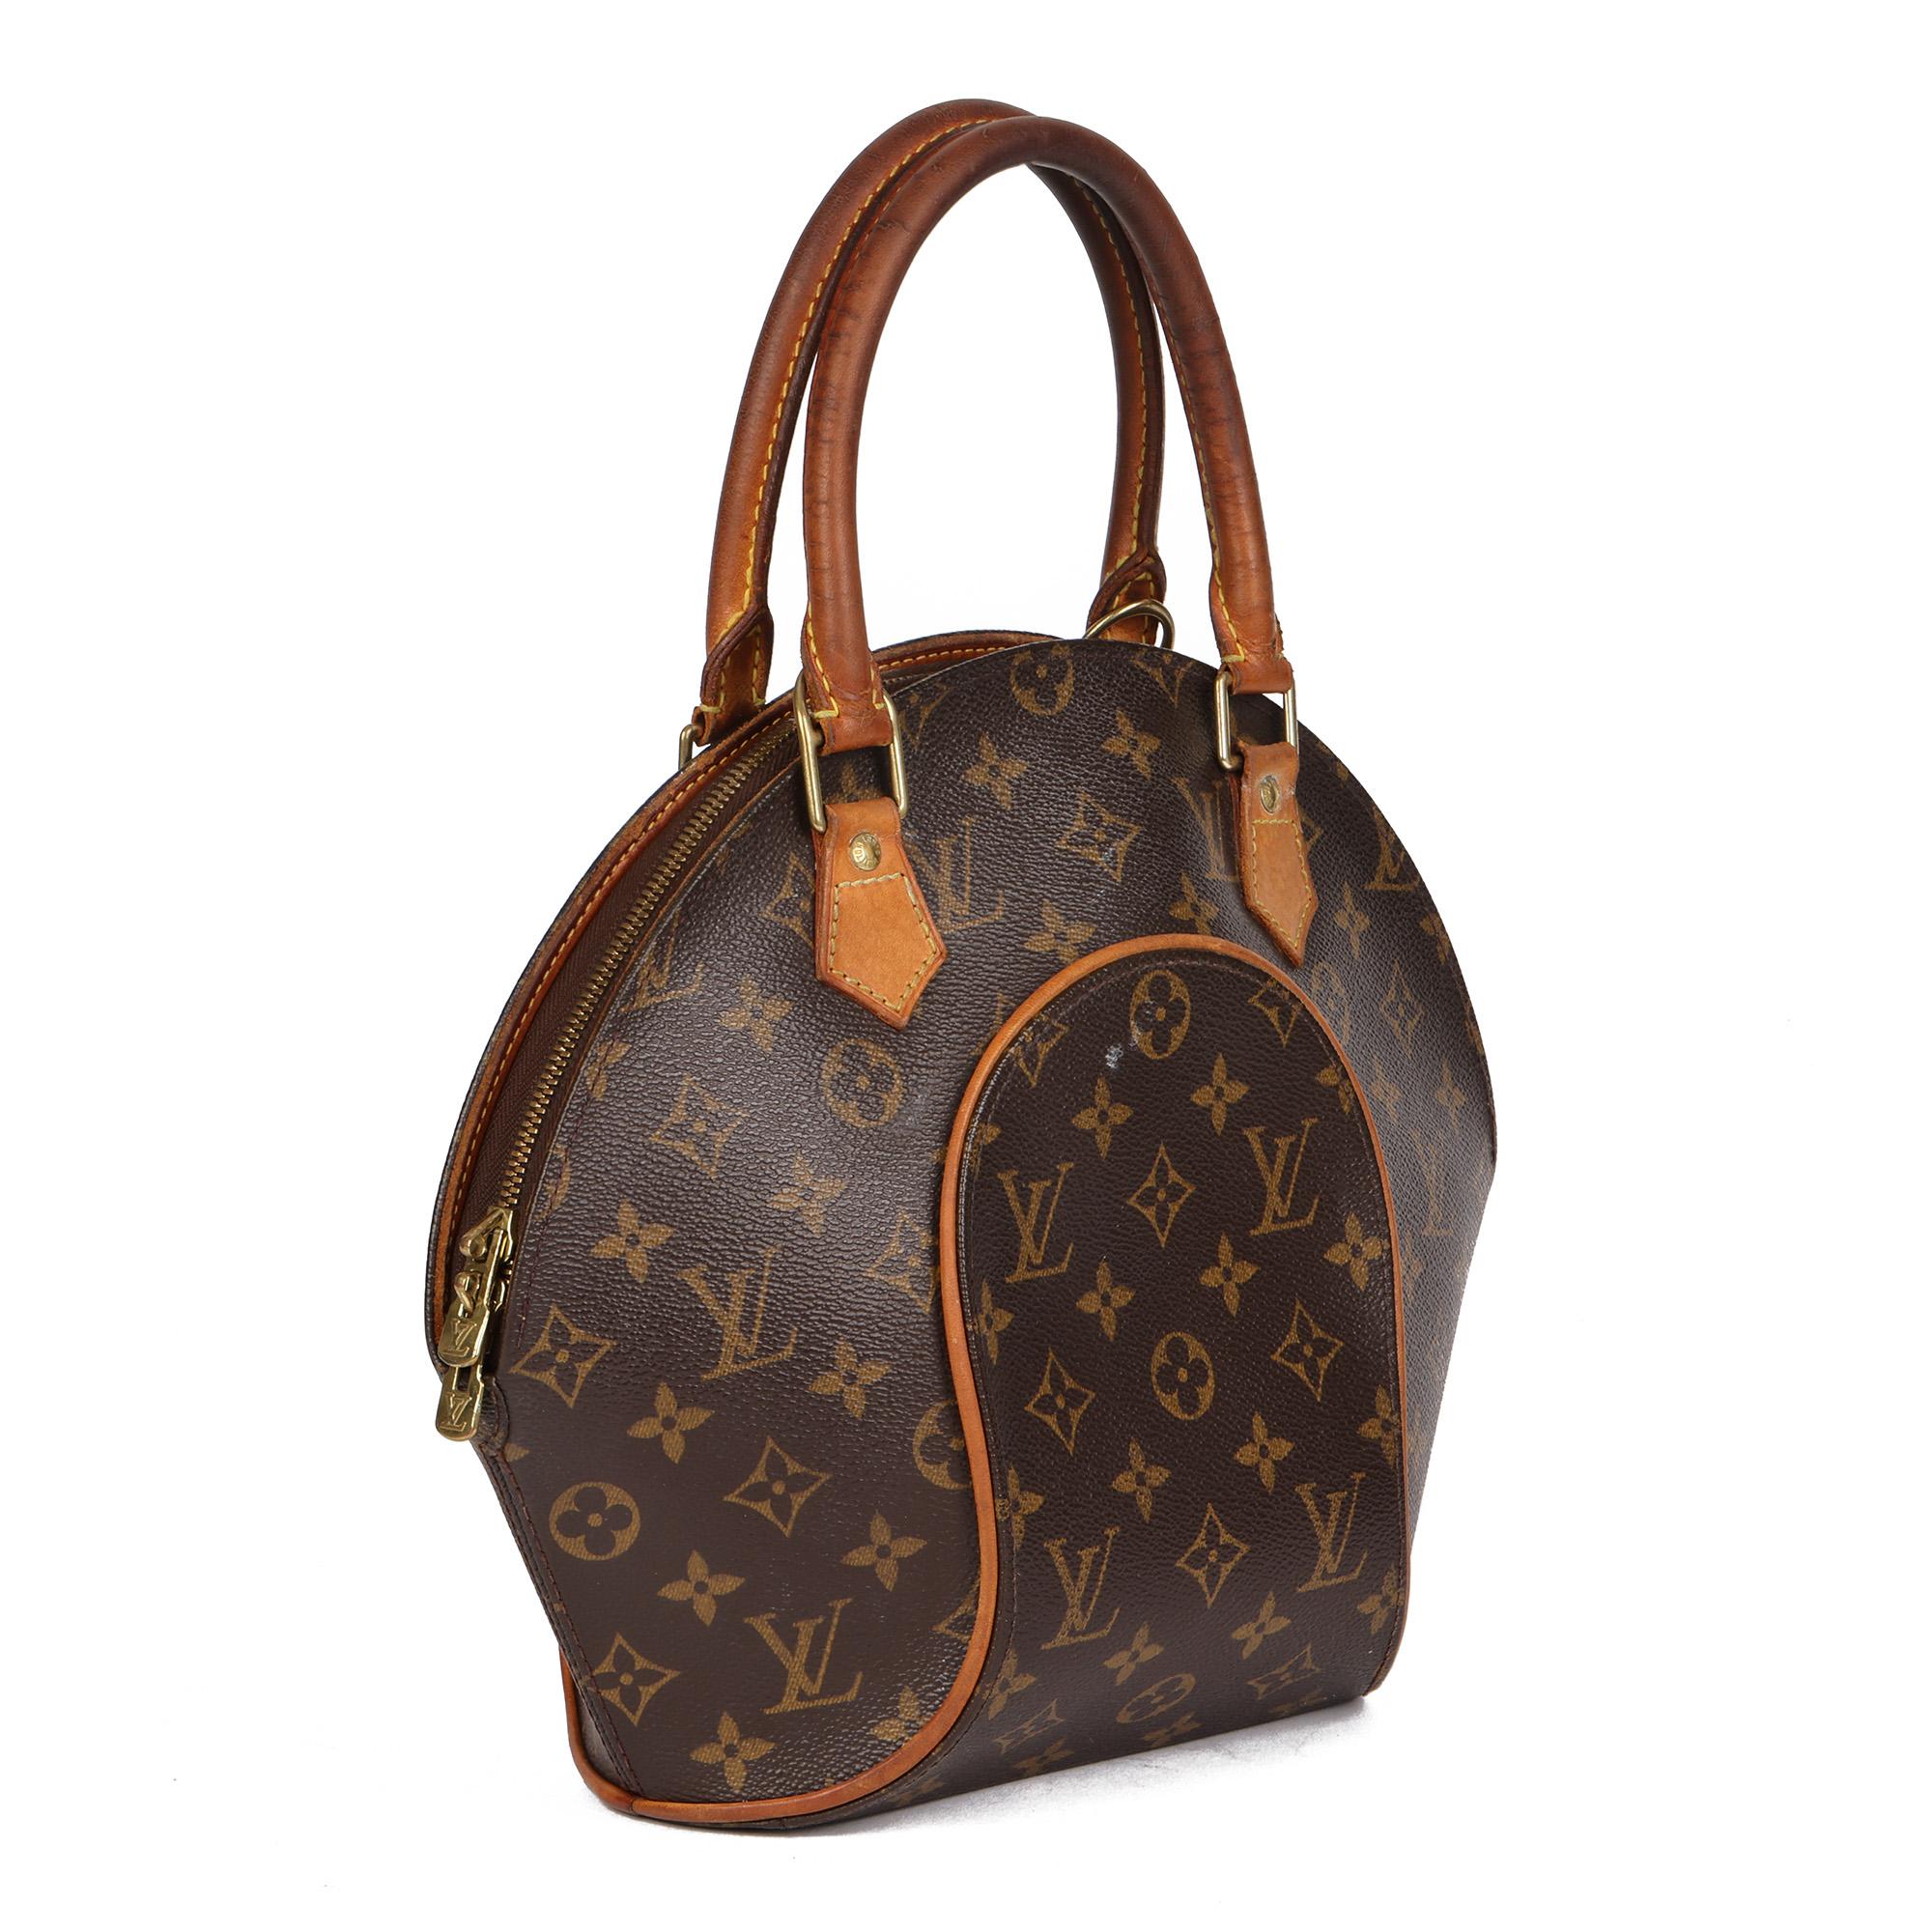 LOUIS VUITTON
Brown Monogram Coated Canvas & Vachetta Leather Ellipse PM

Xupes Reference: CB656
Serial Number: MI 1010
Age (Circa): 2000
Authenticity Details: Date Stamp (Made in France)
Gender: Ladies
Type: Tote

Colour: Brown
Hardware: Golden